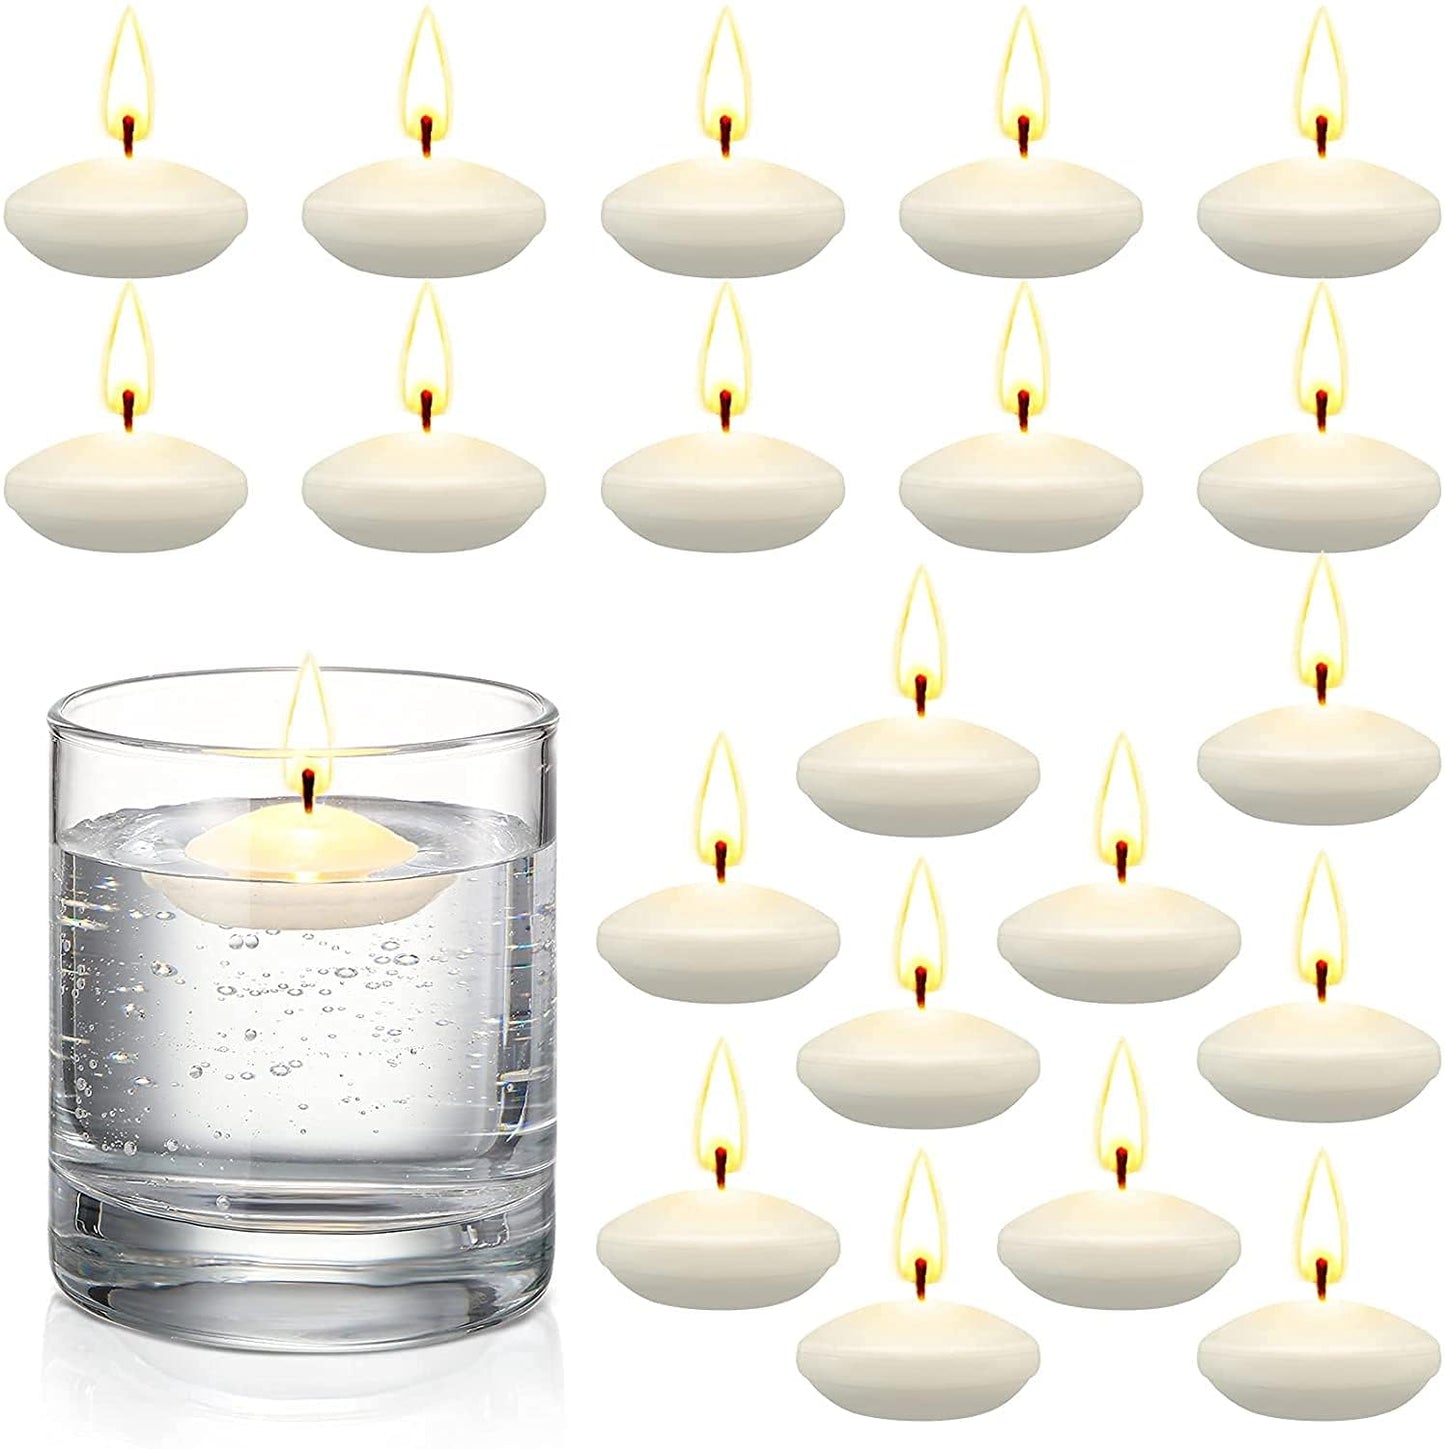 EYUVAA Wax 4 Hrs Burning Floating Candles for Decoration, Unscented Smokeless Dripless Candles for Diwali, Cylinder Vases, Wedding, Party, Pool, Festival (White, Set of 20)